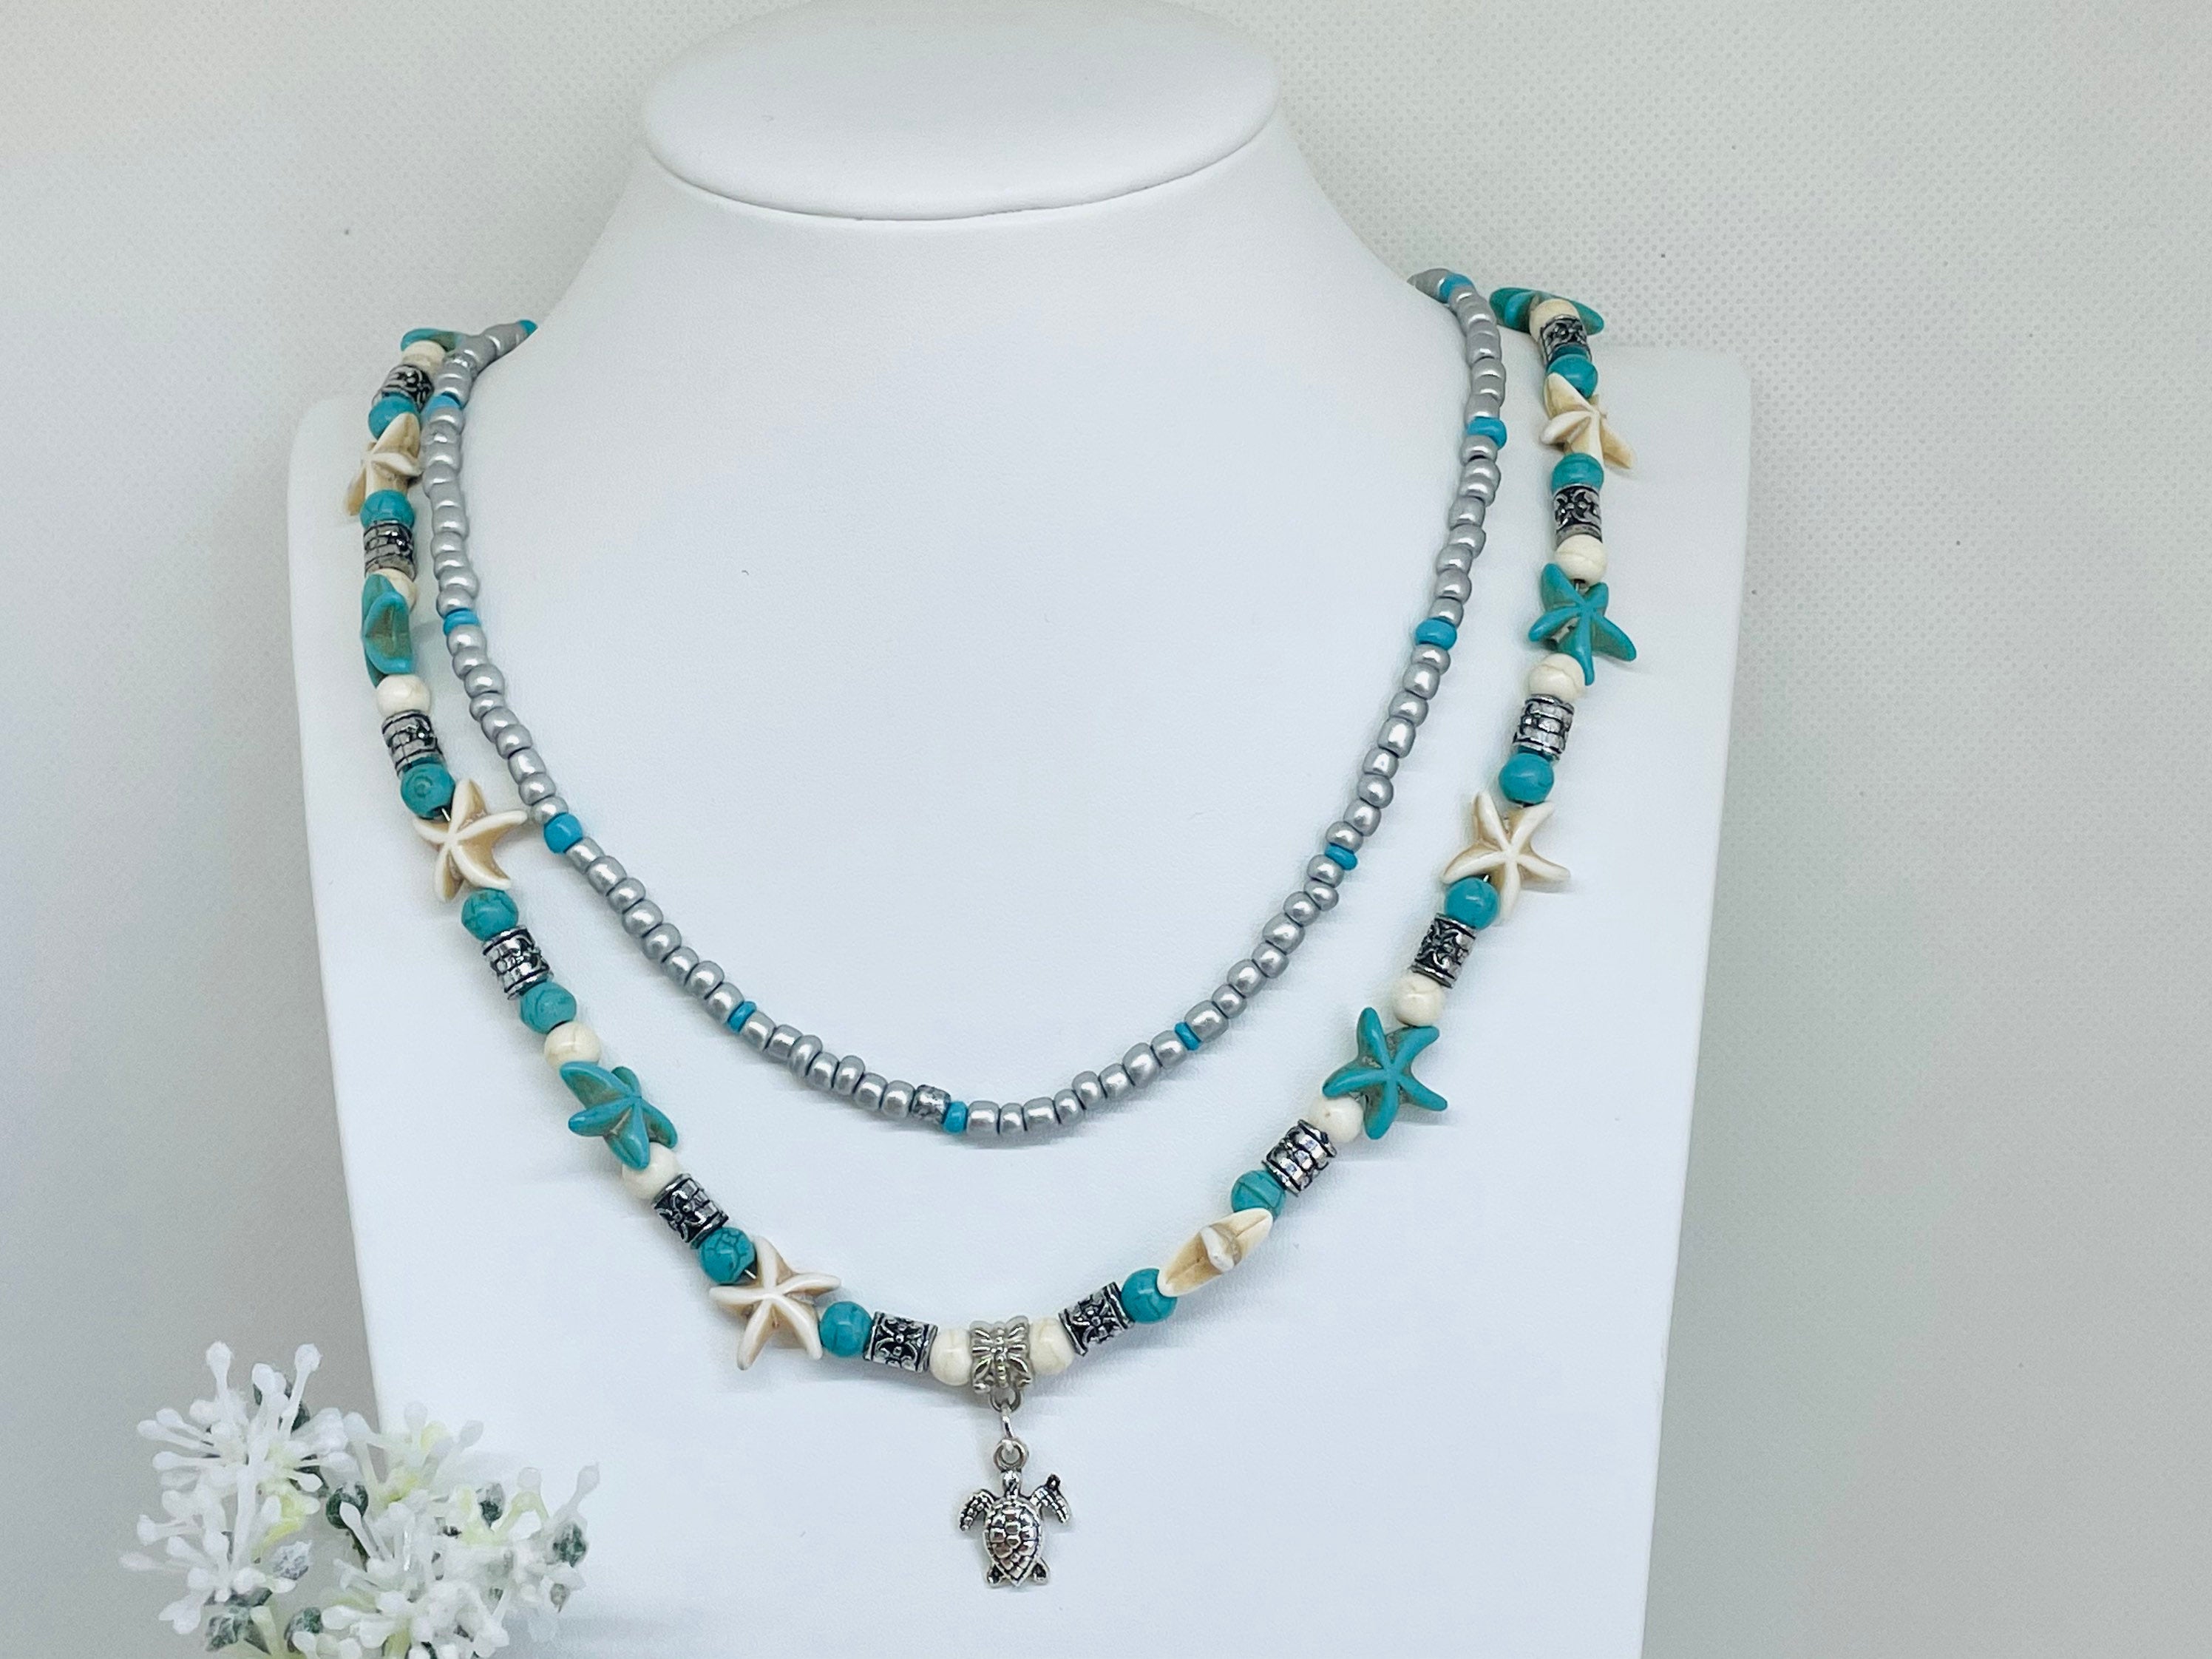 Beaded Necklace with Sea Turtle Charm Ocean Lovers Jewelry